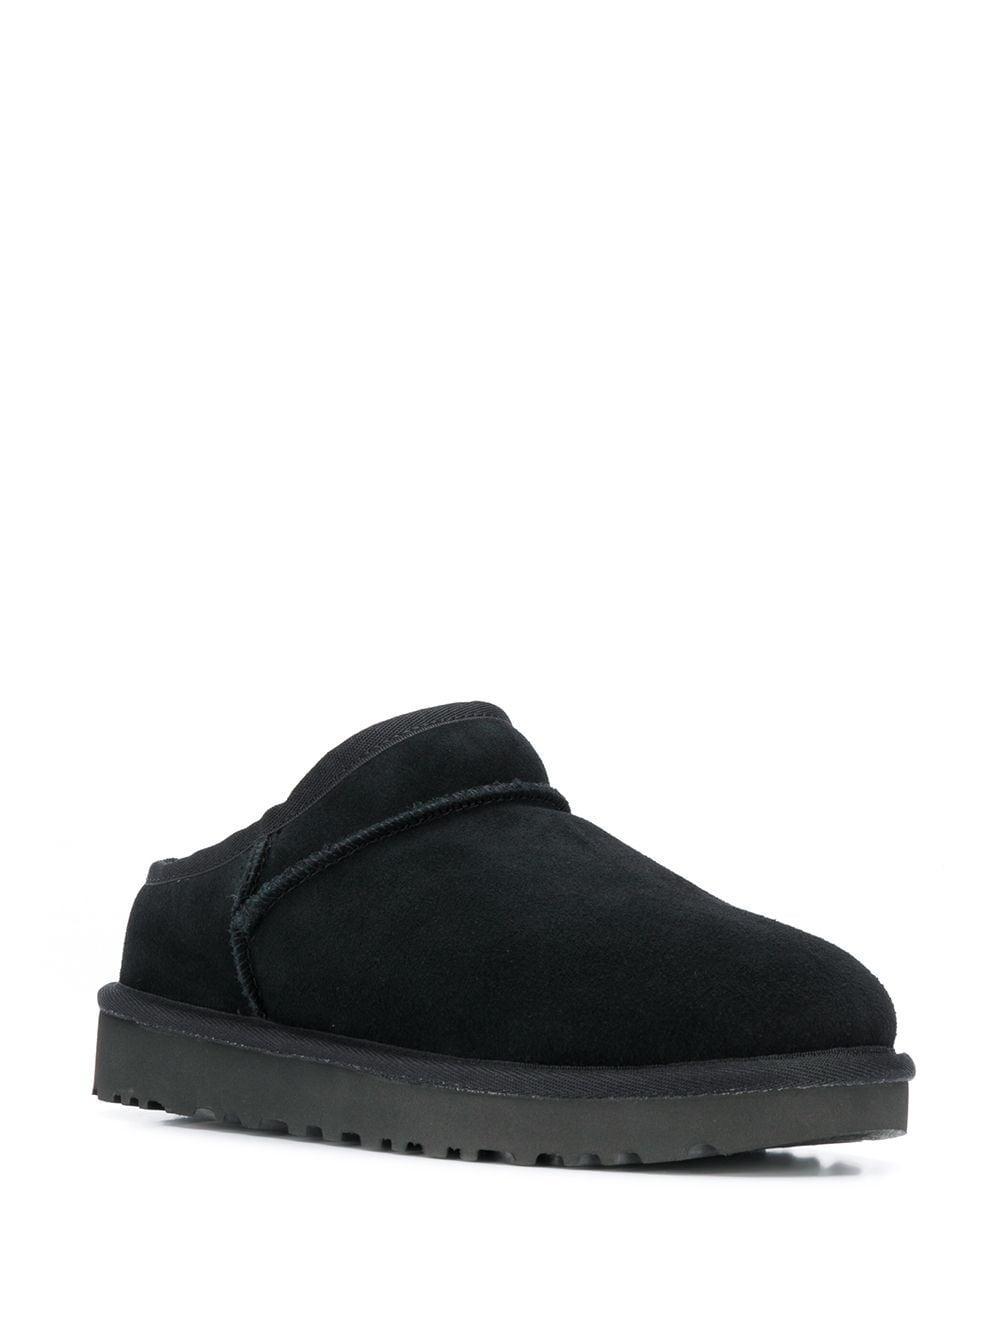 UGG Leather Classic Slippers in Black - Lyst